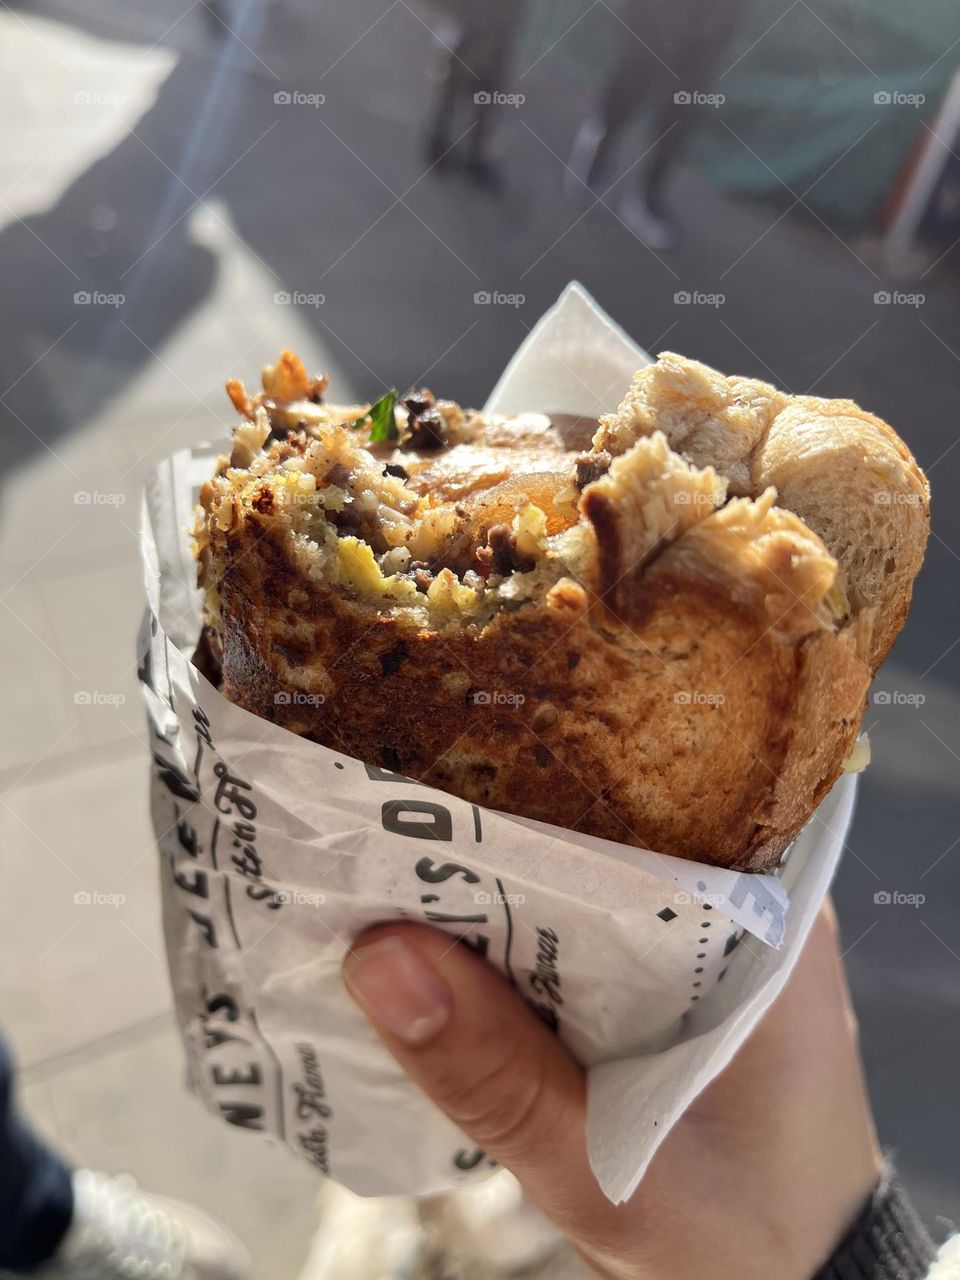 A market toastie made fresh with some bites out of it 